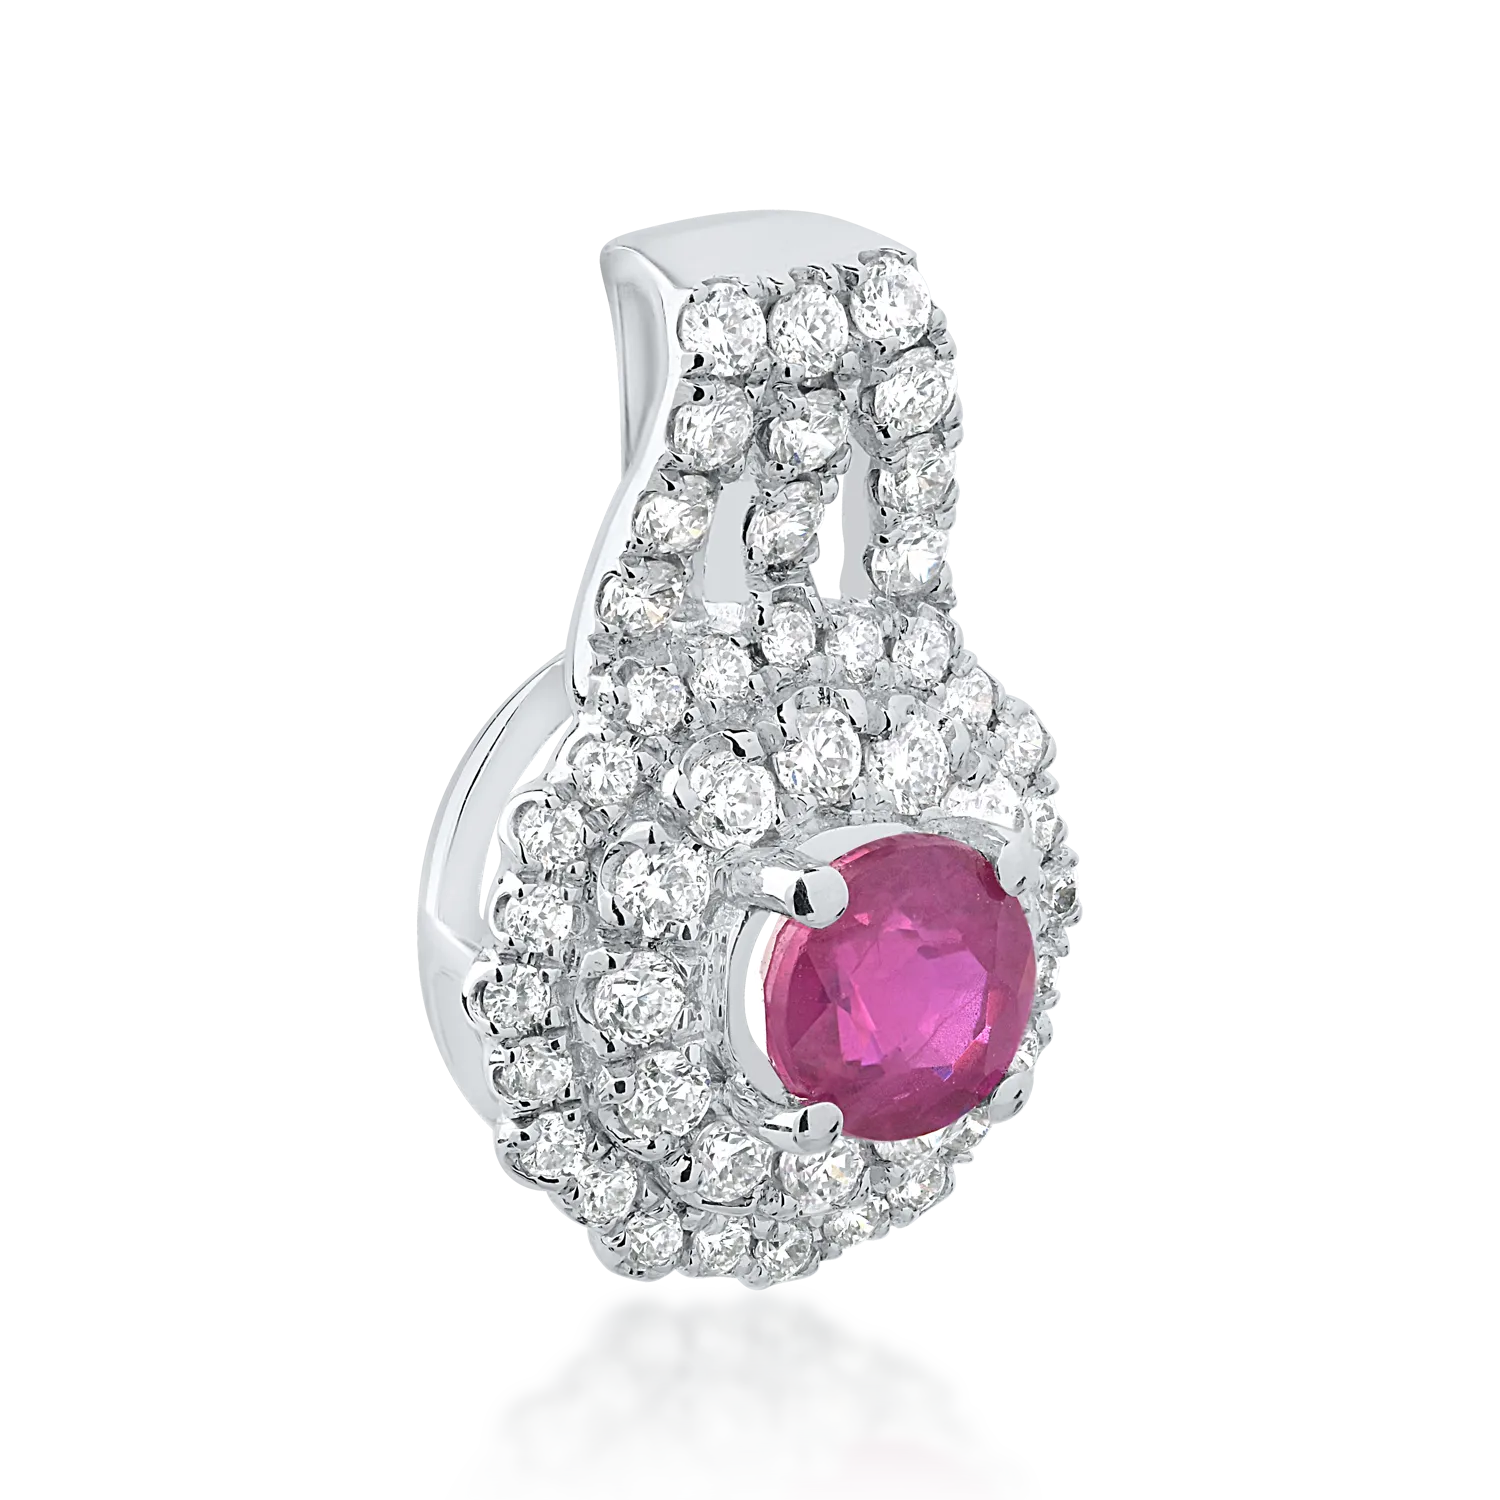 18K white gold pendant with 0.33ct ruby and 0.24ct diamonds